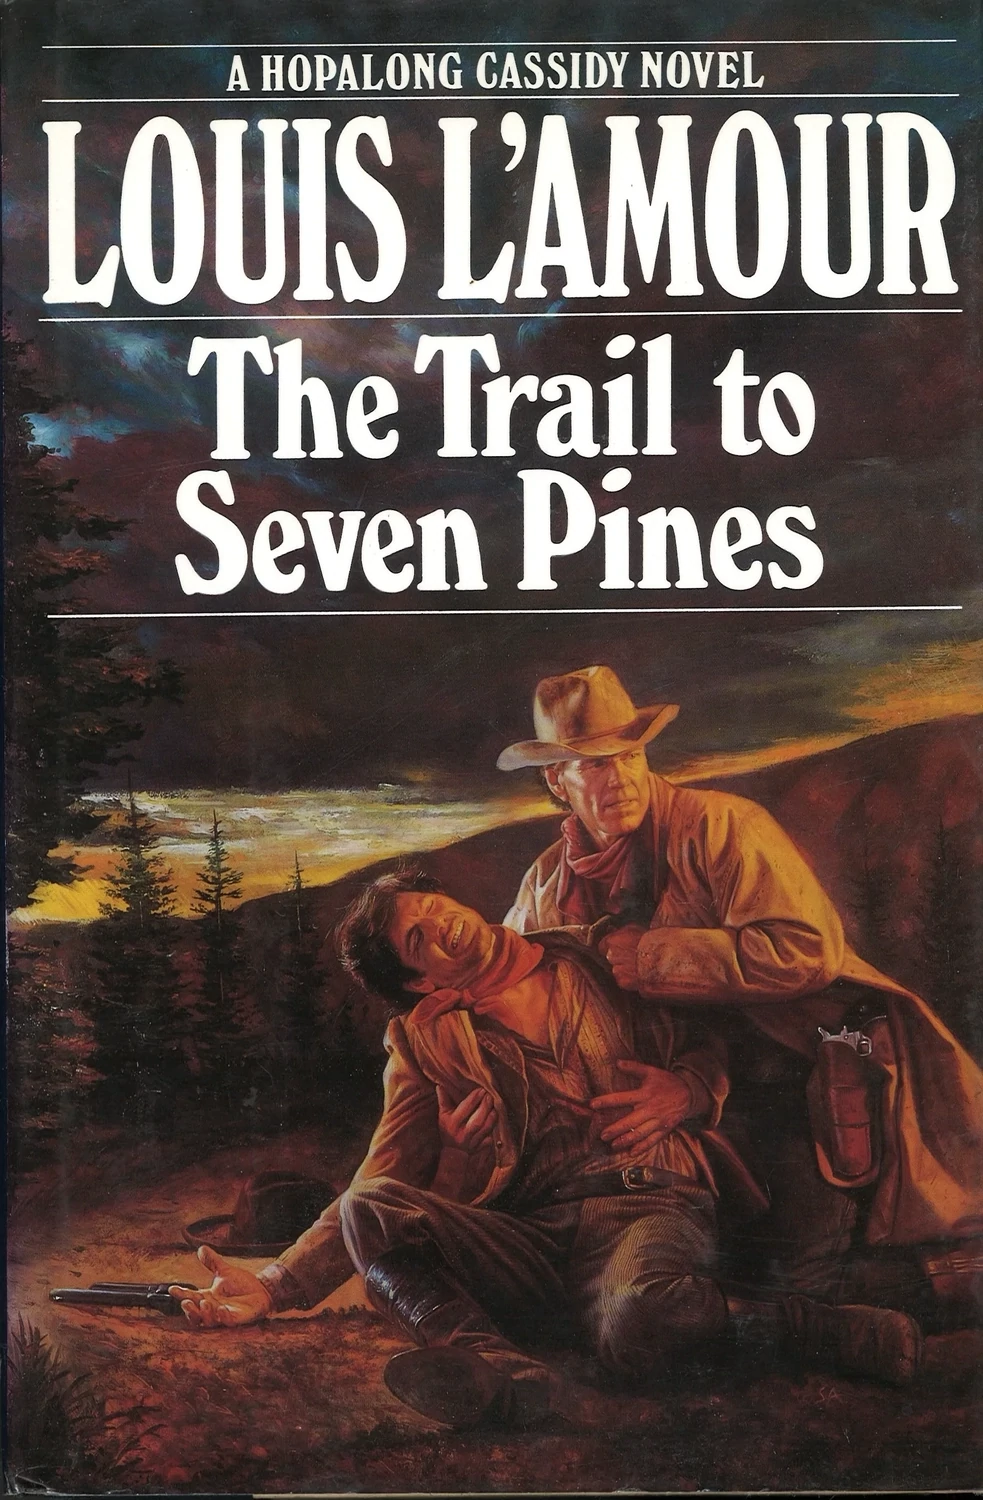 The Trail to Seven Pines by Louis L'Amour